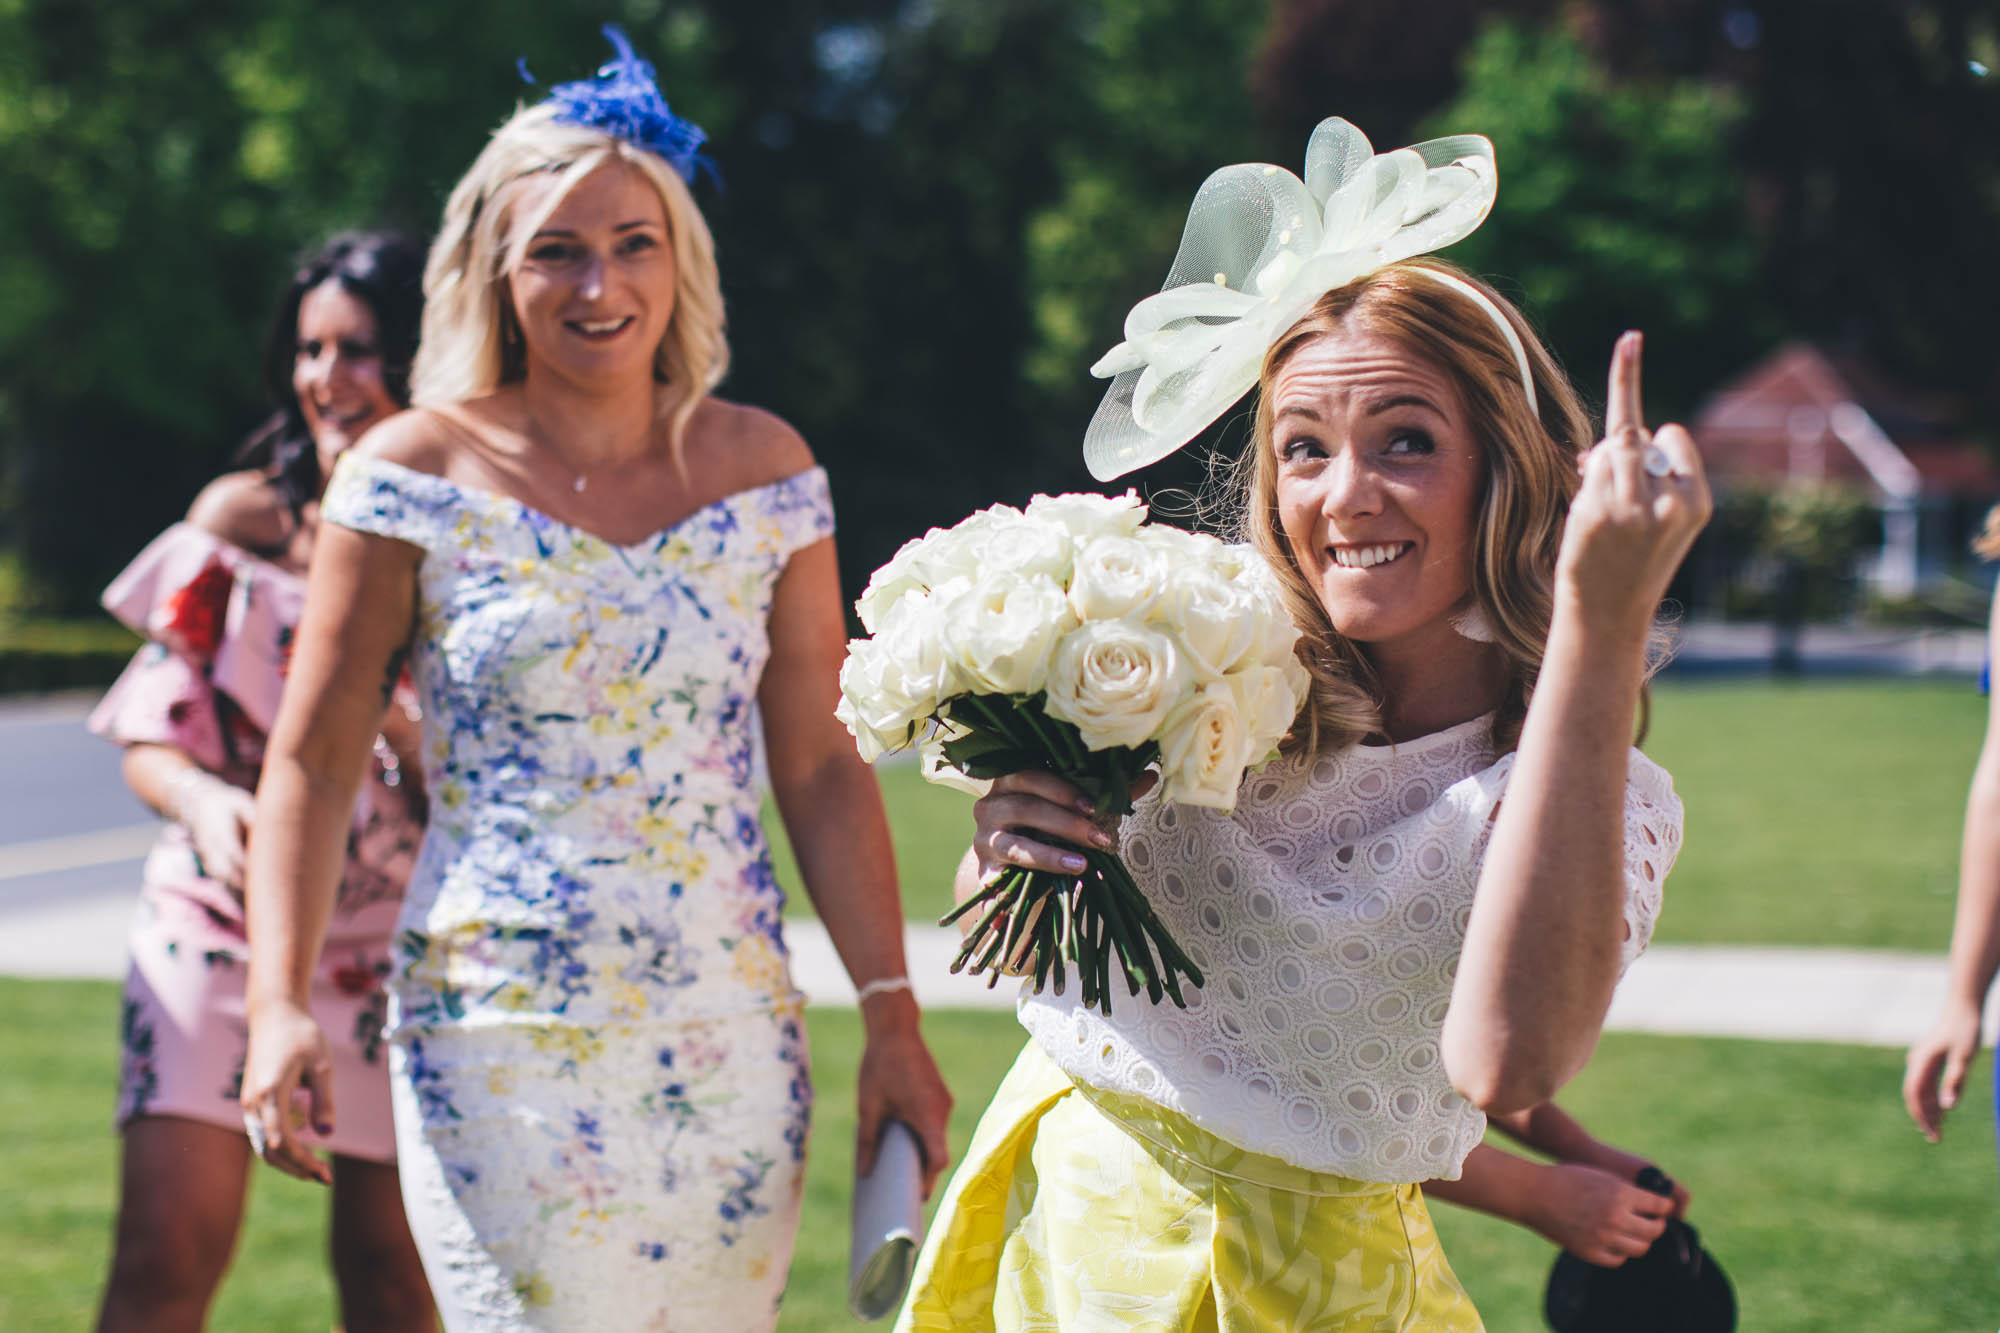 Wedding guest who has caught bride bouquet gestures to boyfriend to put a ring on her engagement finger